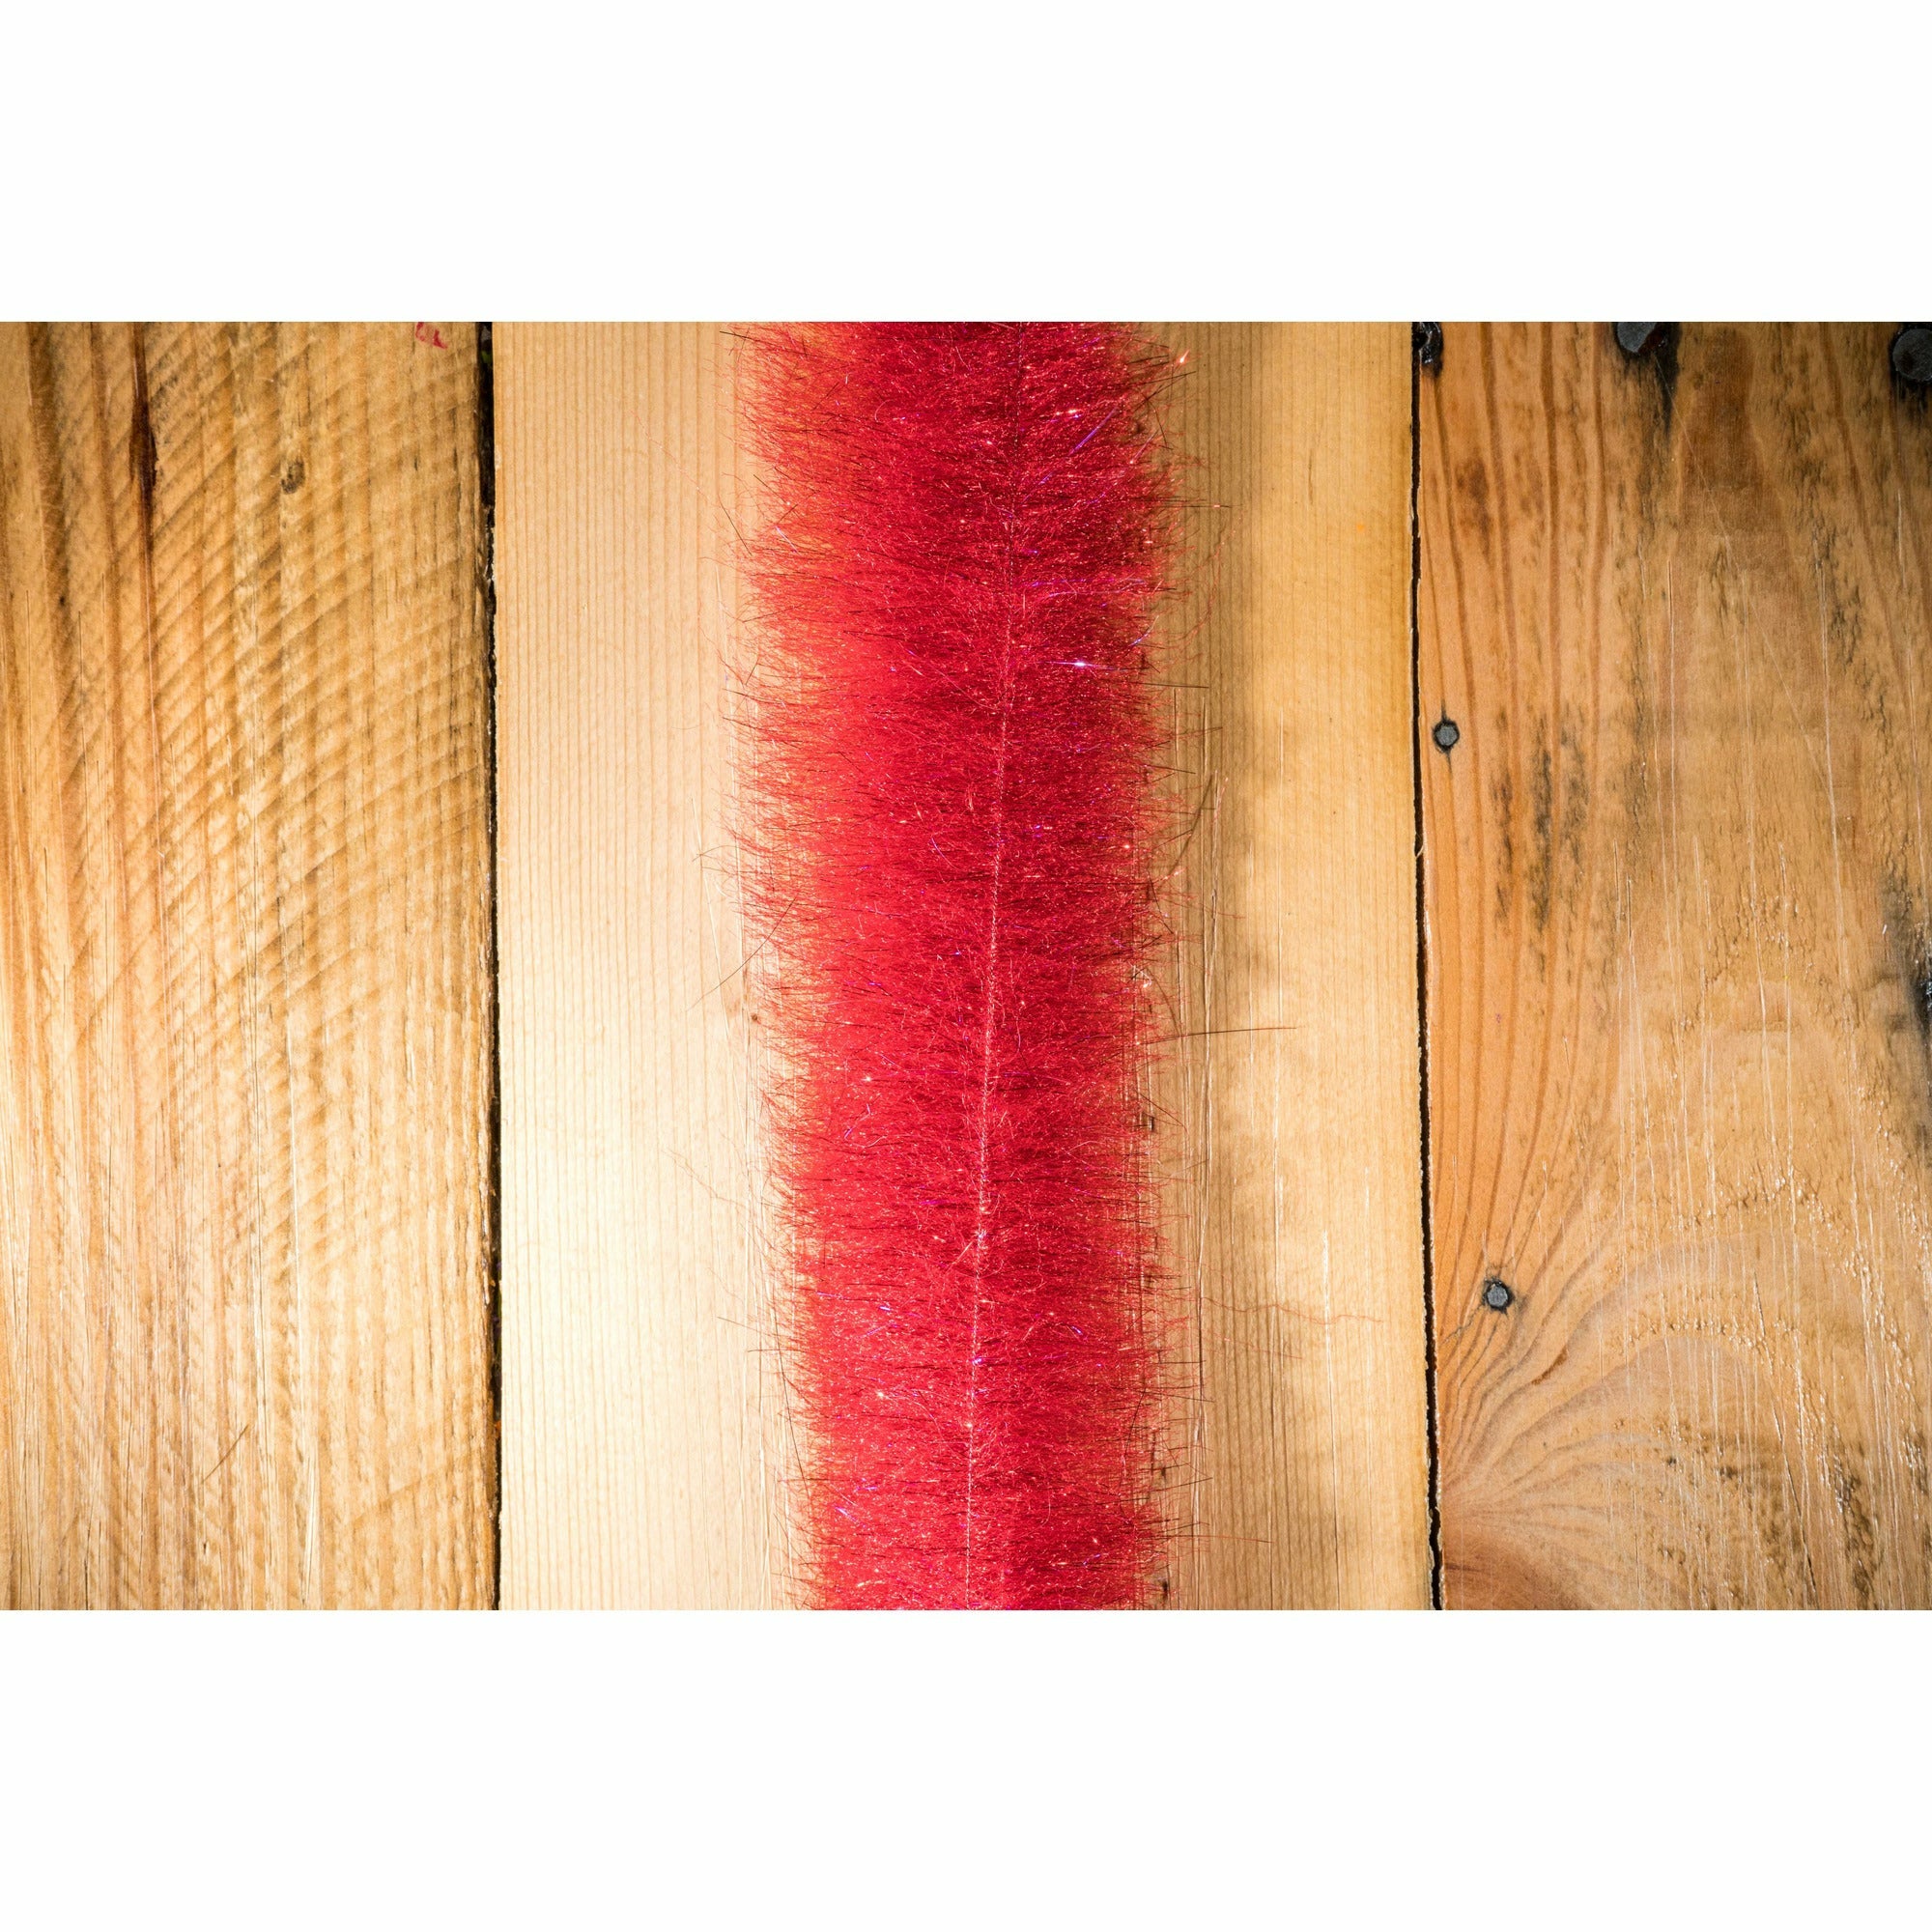 EP Minnow Head Brush 1.5" - Bloody Red